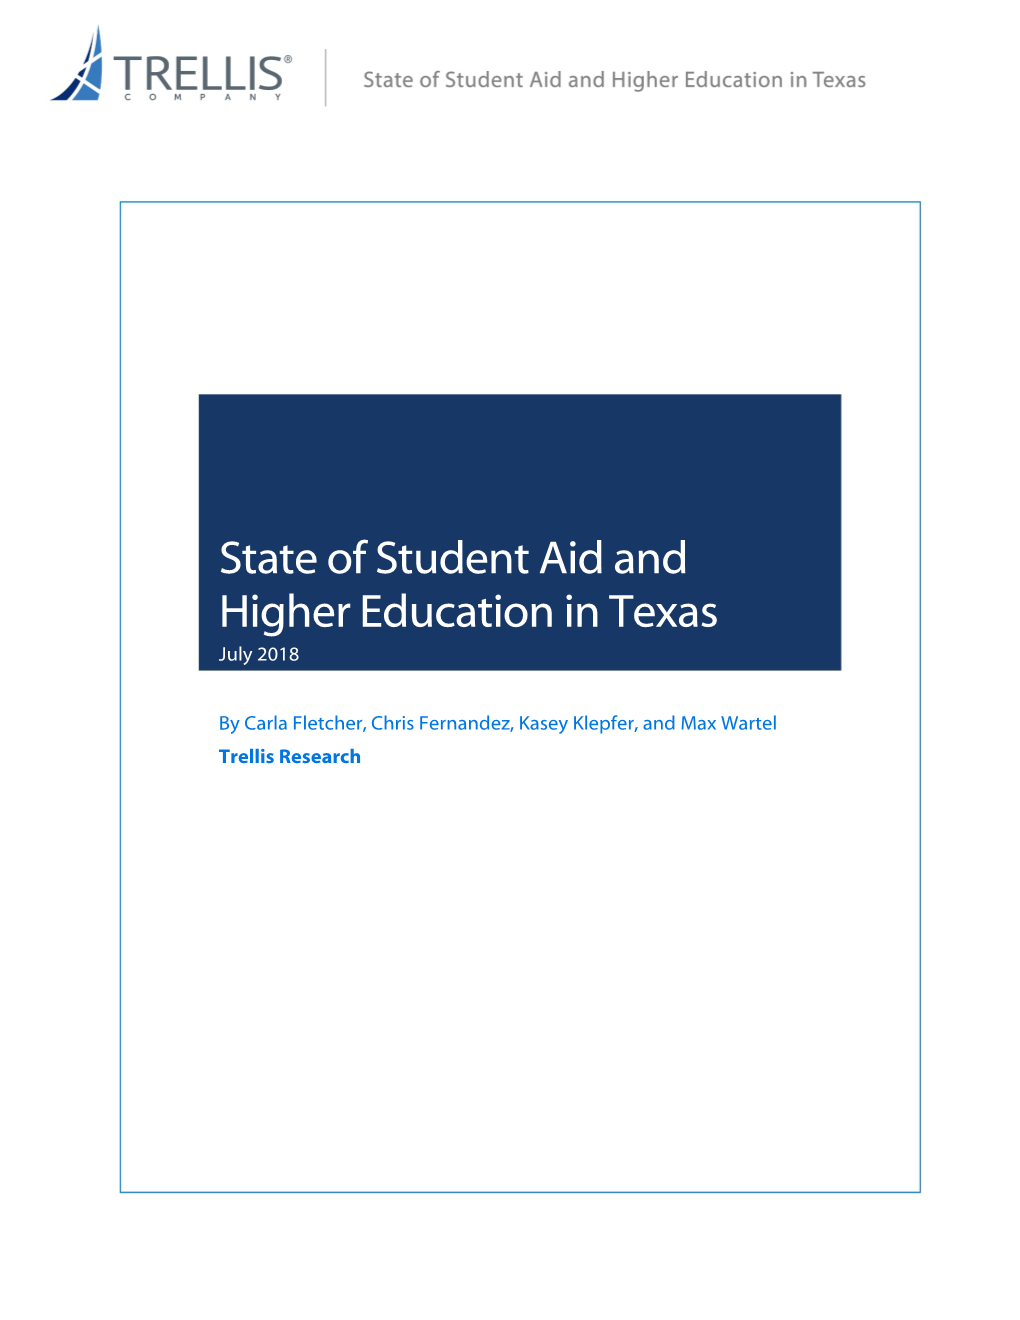 State of Student Aid and Higher Education in Texas July 2018